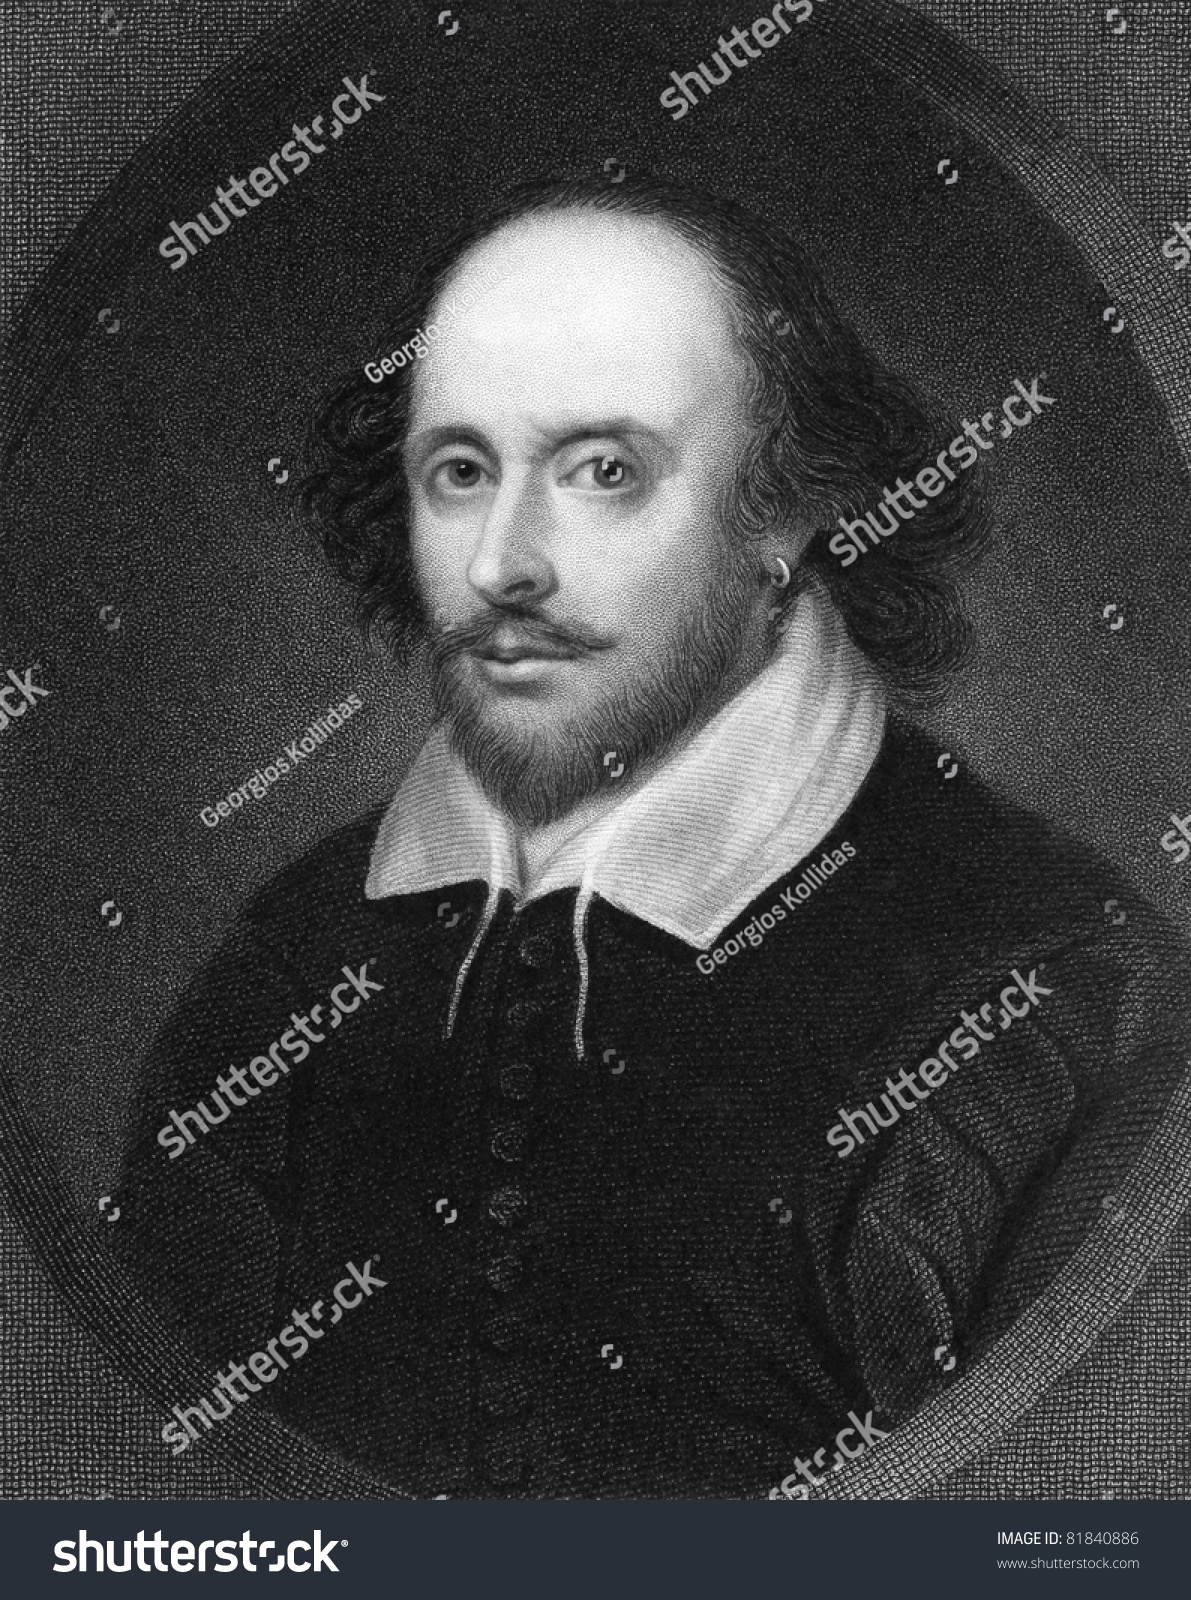 William Shakespeare 15641616 Engraved By Escriven Stock Photo 81840886 ...